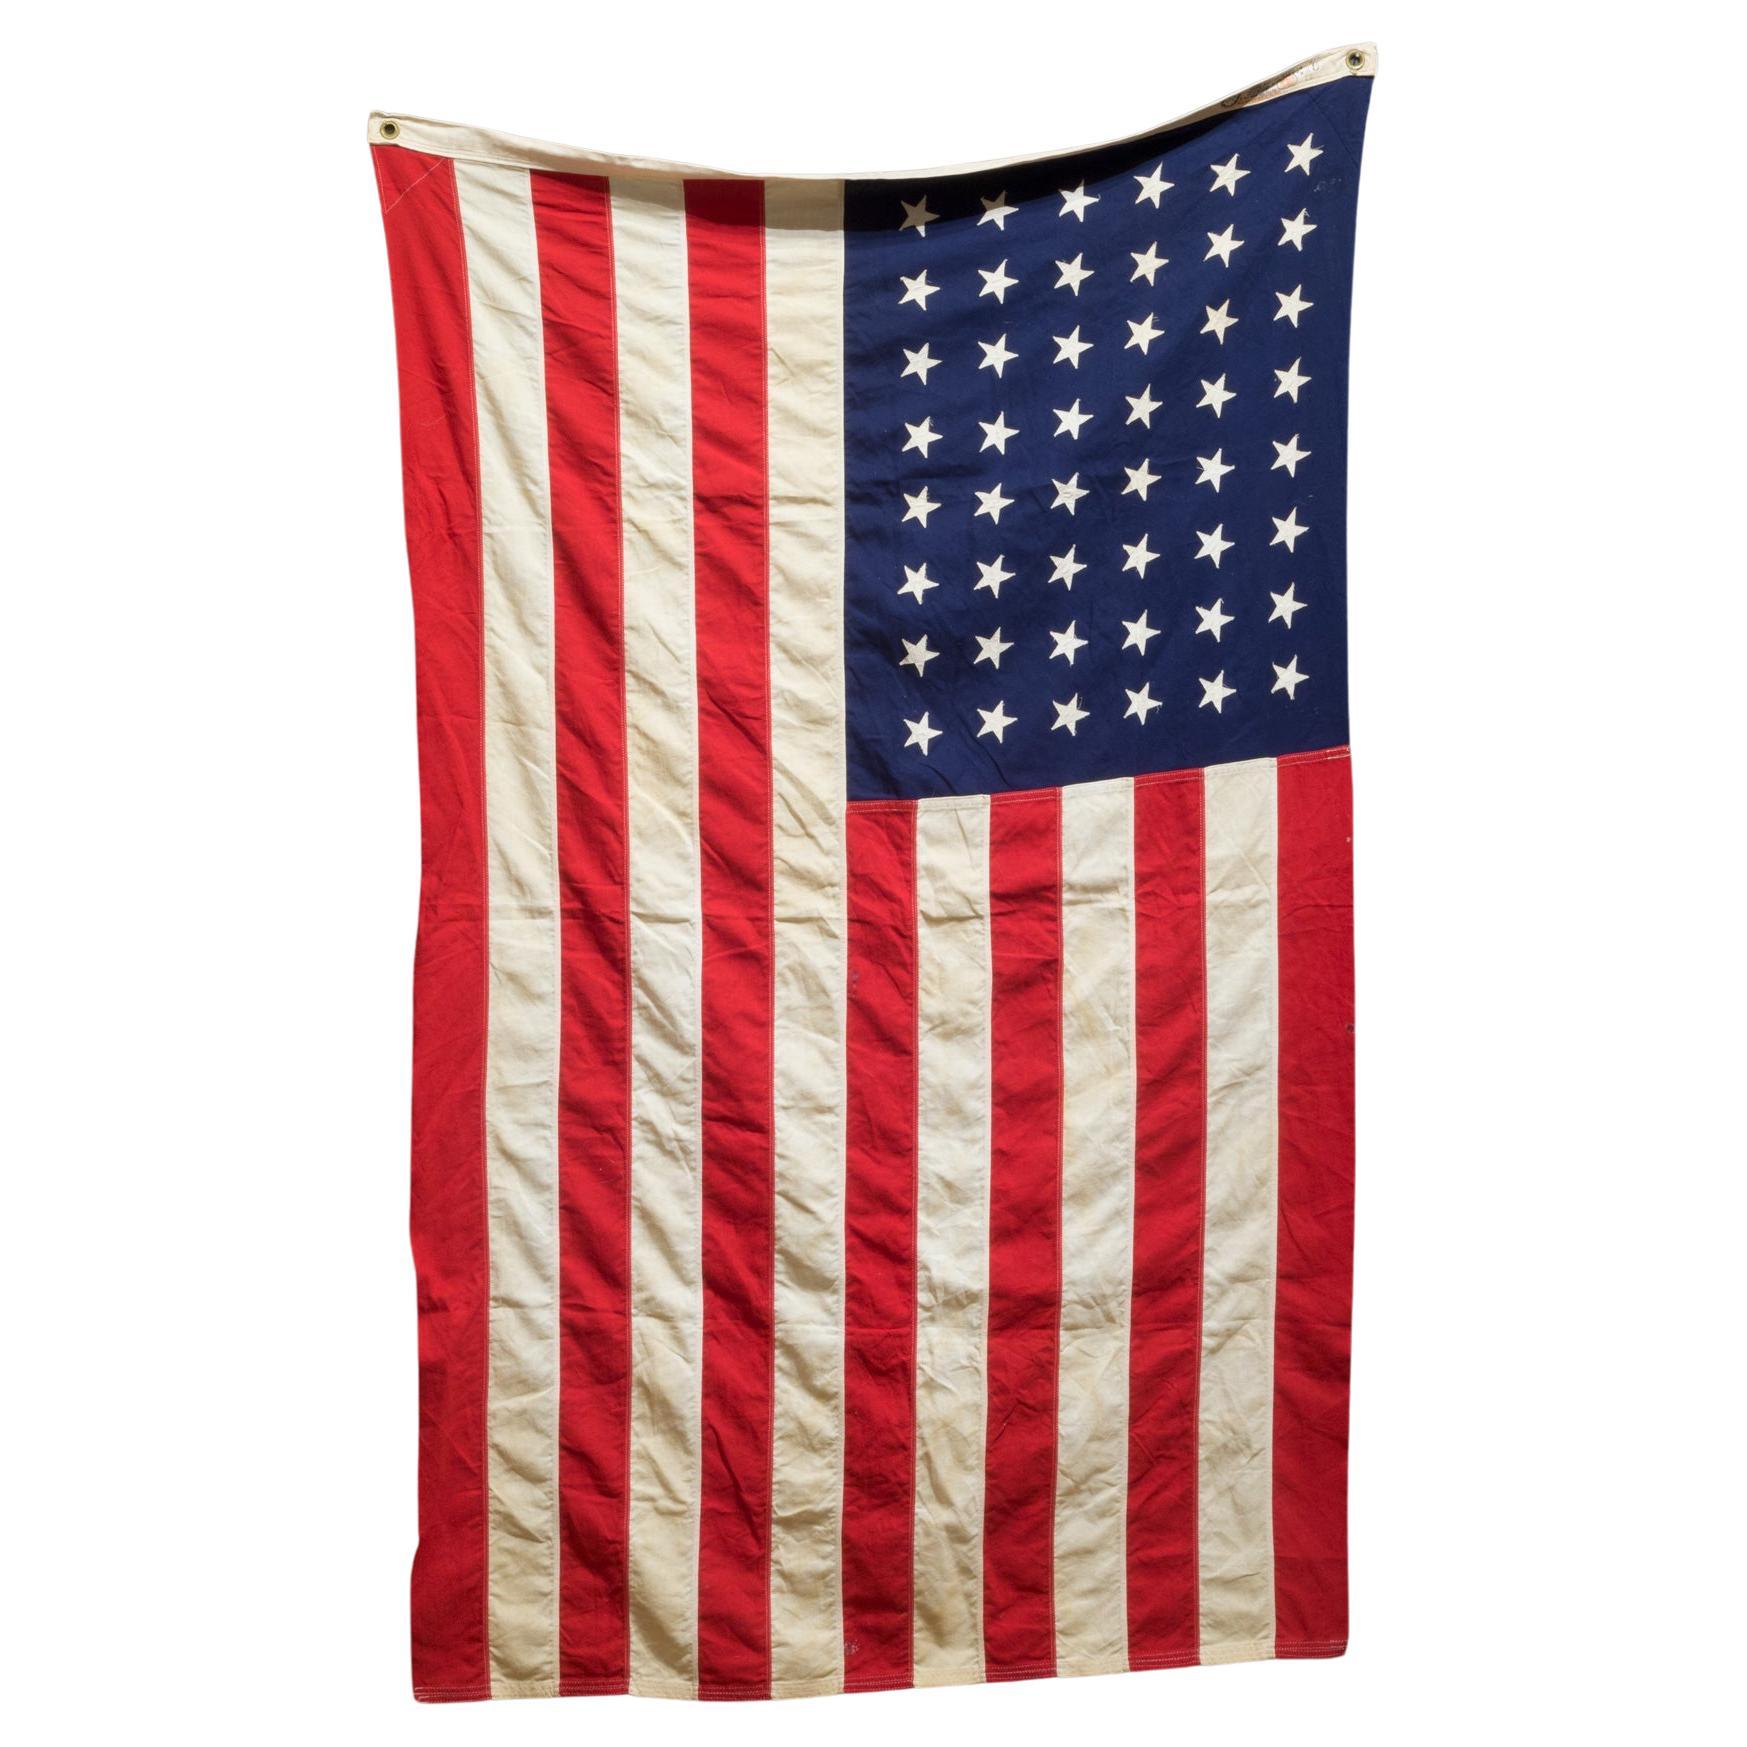 Early 20th C. Monumental American Flag with 48 Stars c.1940-1950